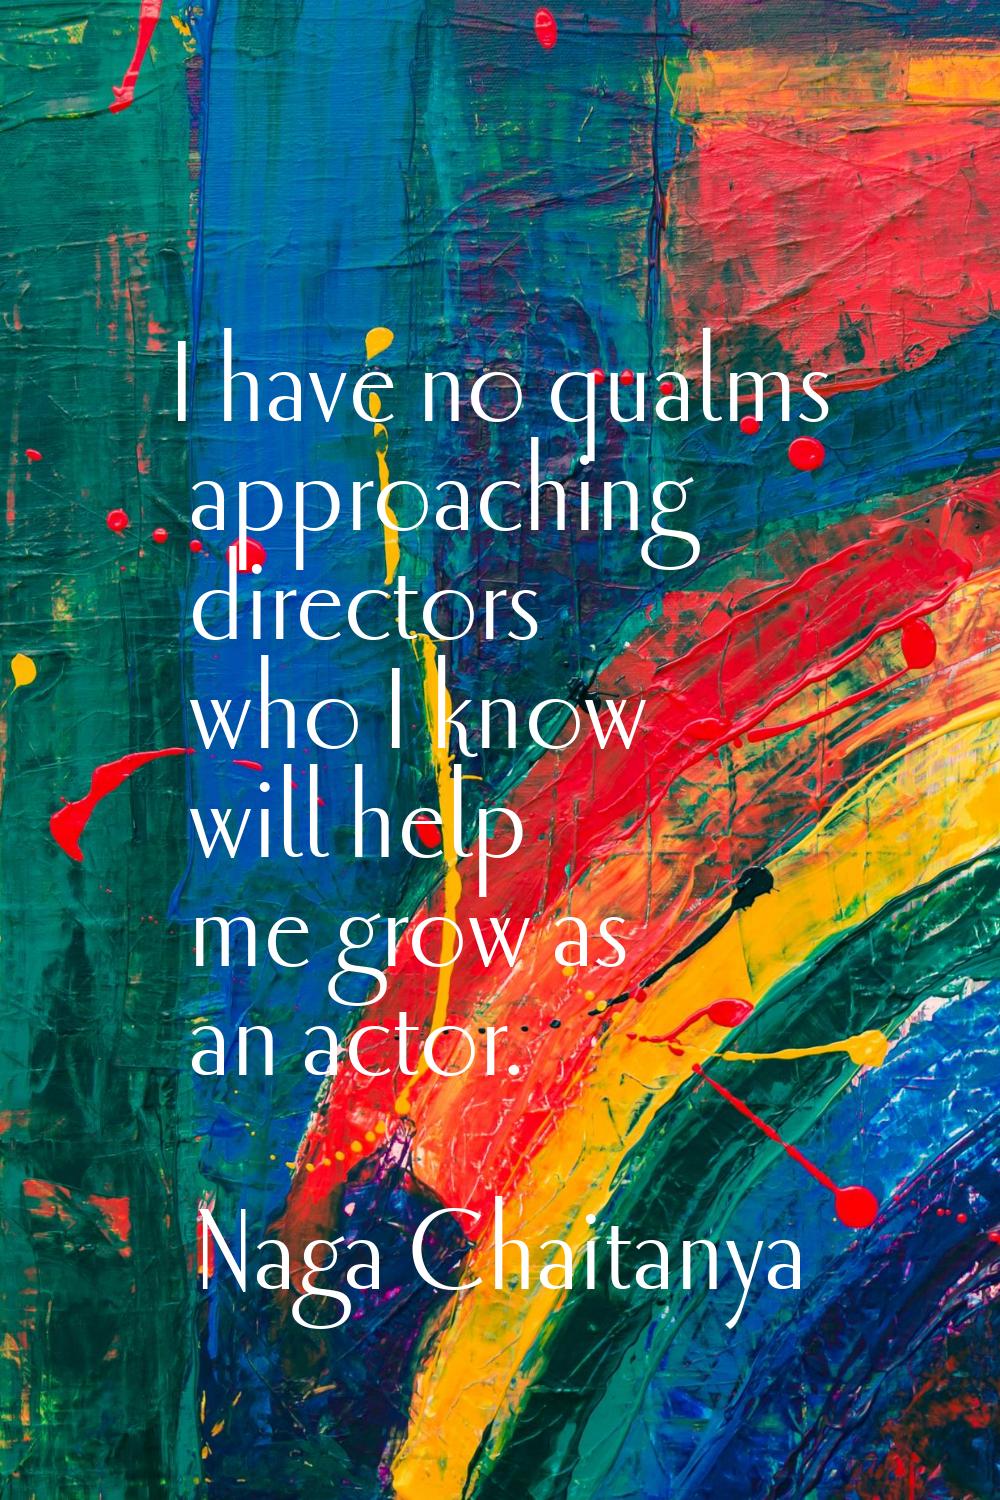 I have no qualms approaching directors who I know will help me grow as an actor.